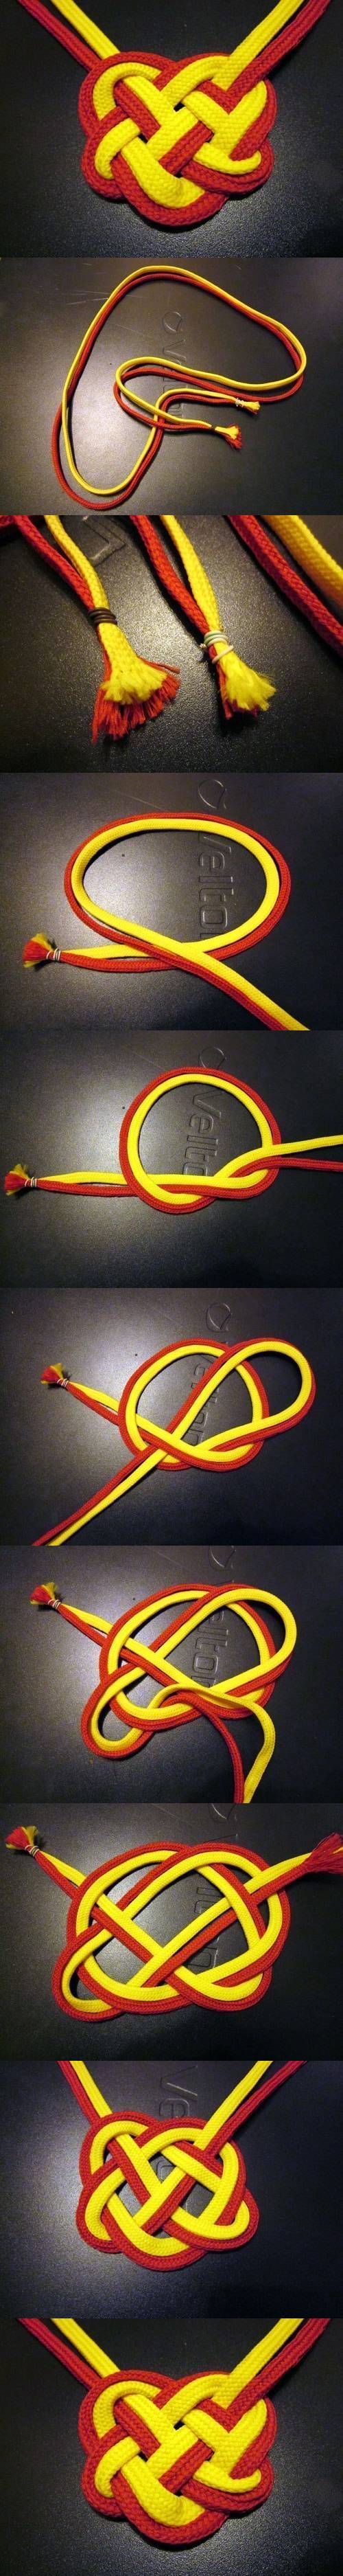 Chinese knot necklace tutorial